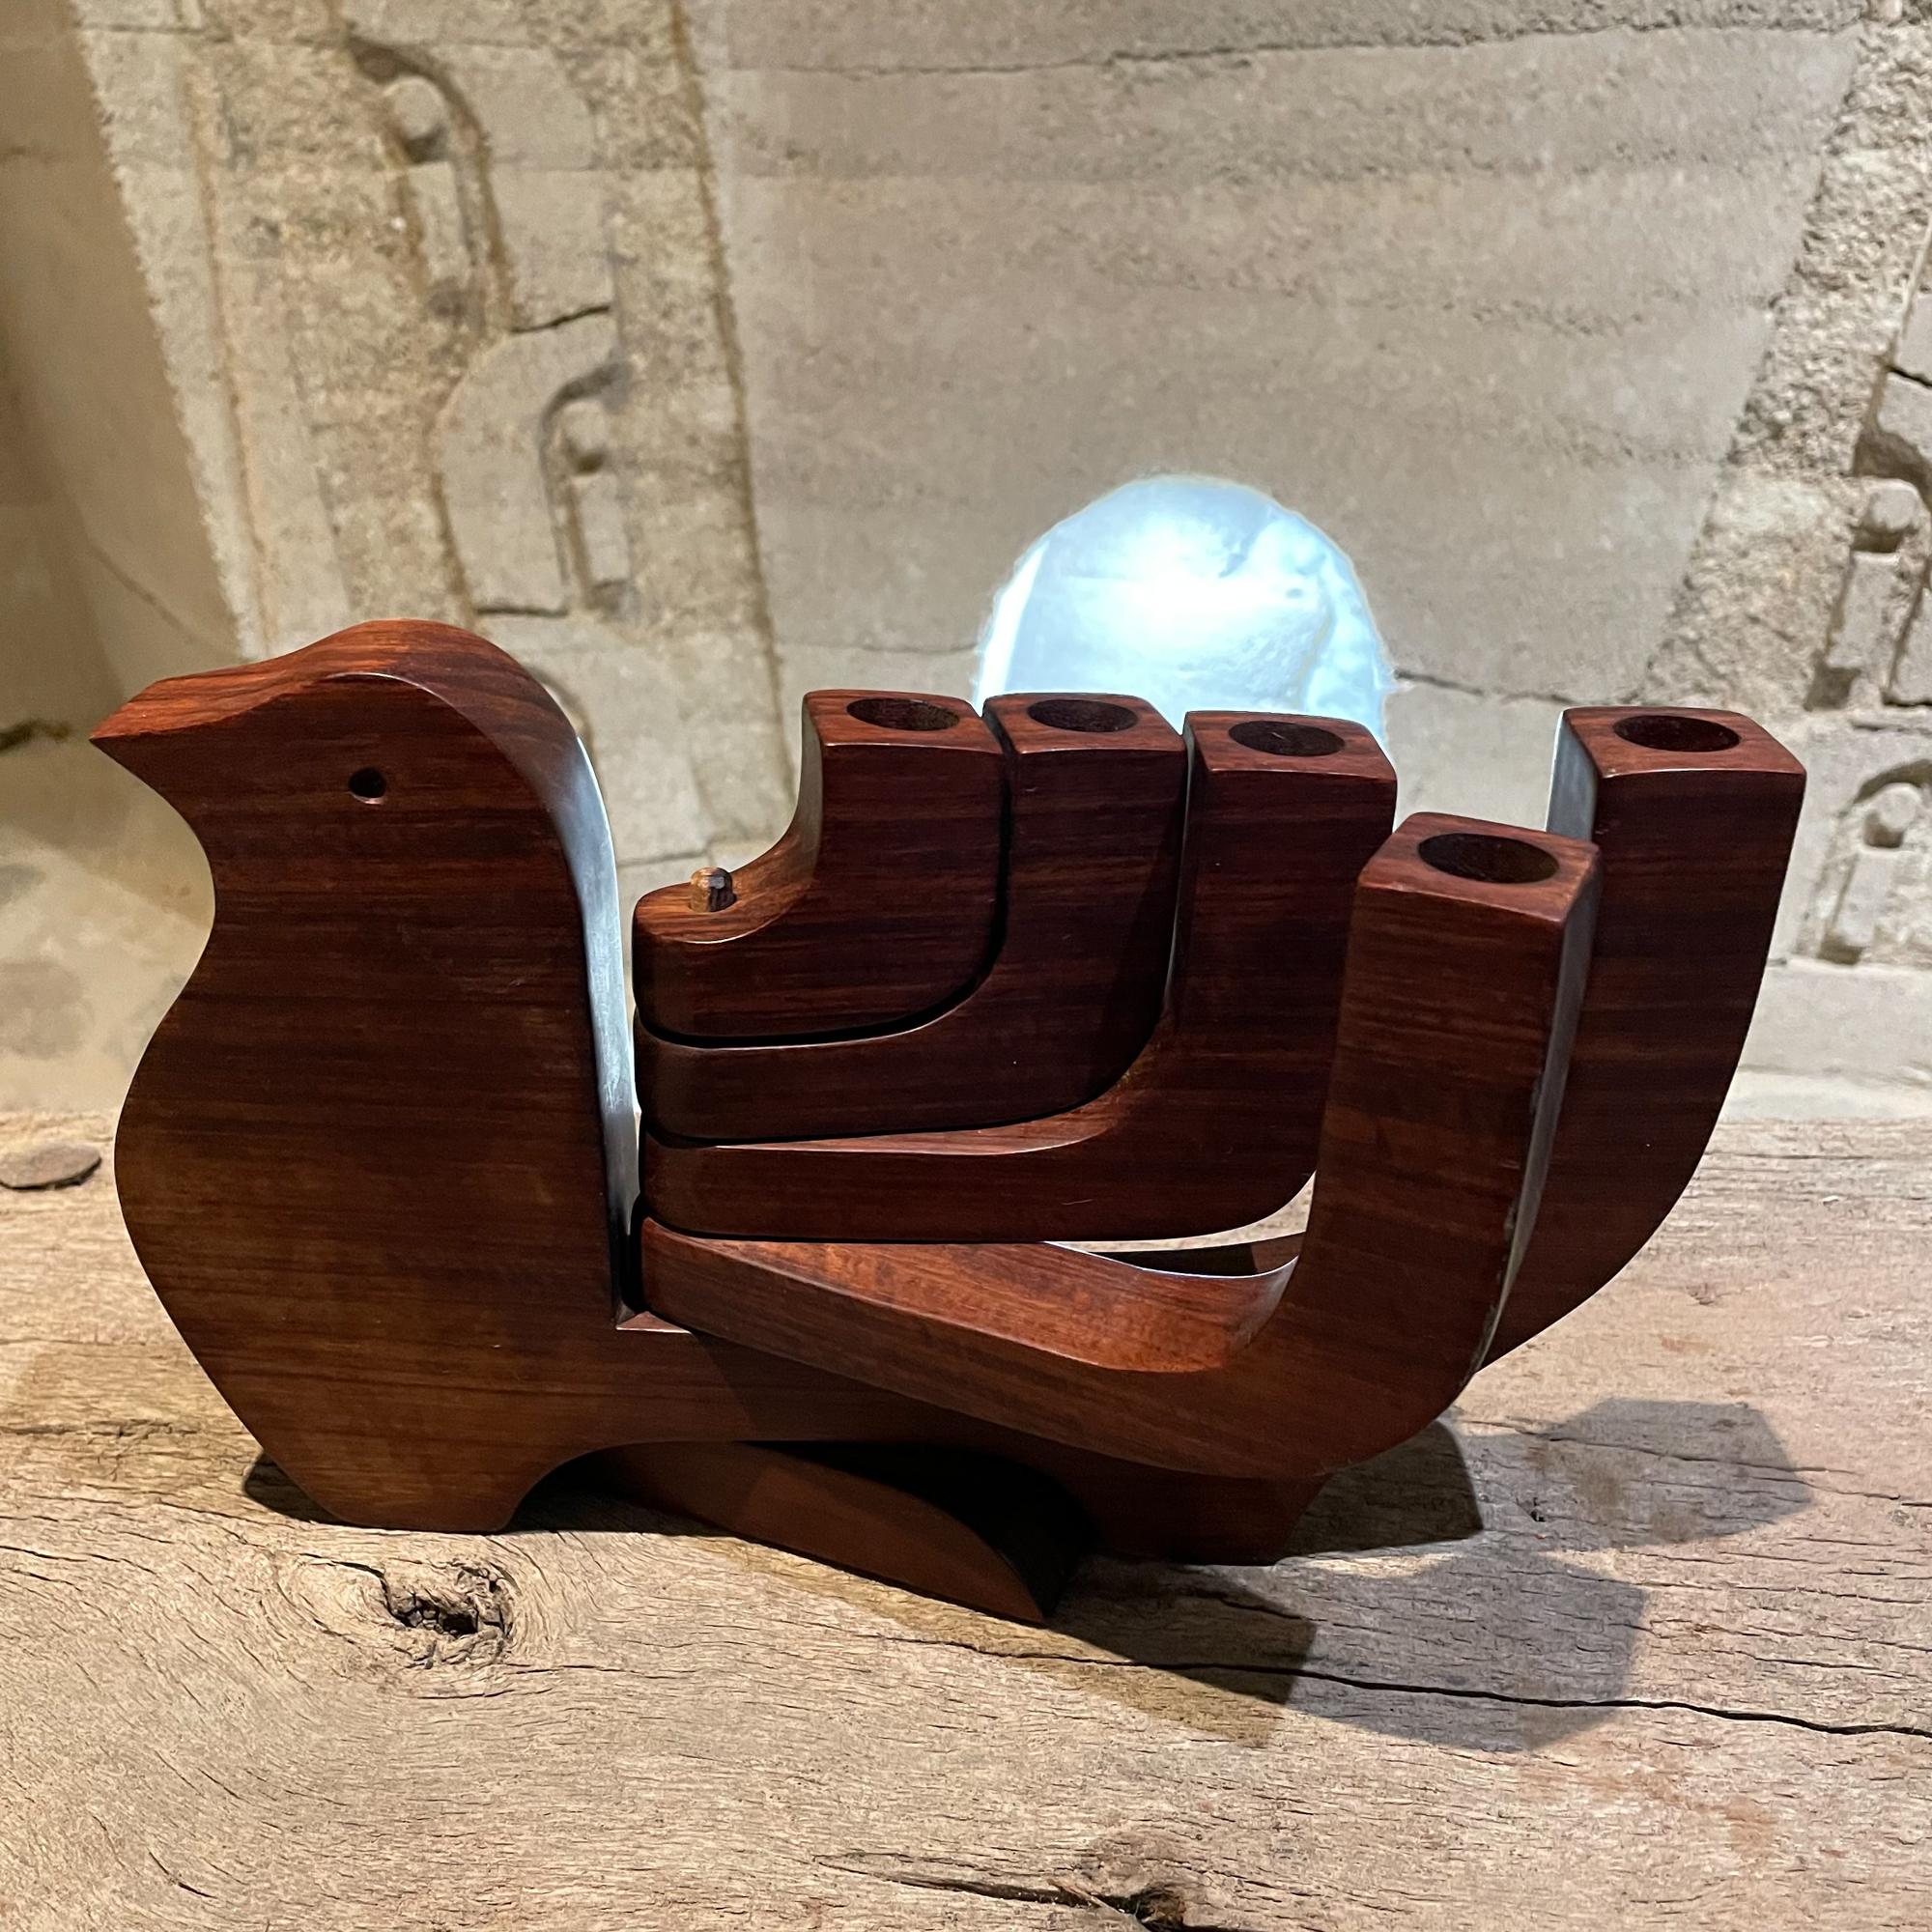 Modern peace dove splayed 5 arm candle holder in carved cocobolo hard wood attributed to Don Shoemaker Mexico 1970s
Unmarked. No signature.
Measures: 6.5tall x 10.5w x 1.5d inches
Unrestored preowned vintage presentation and condition.
Please